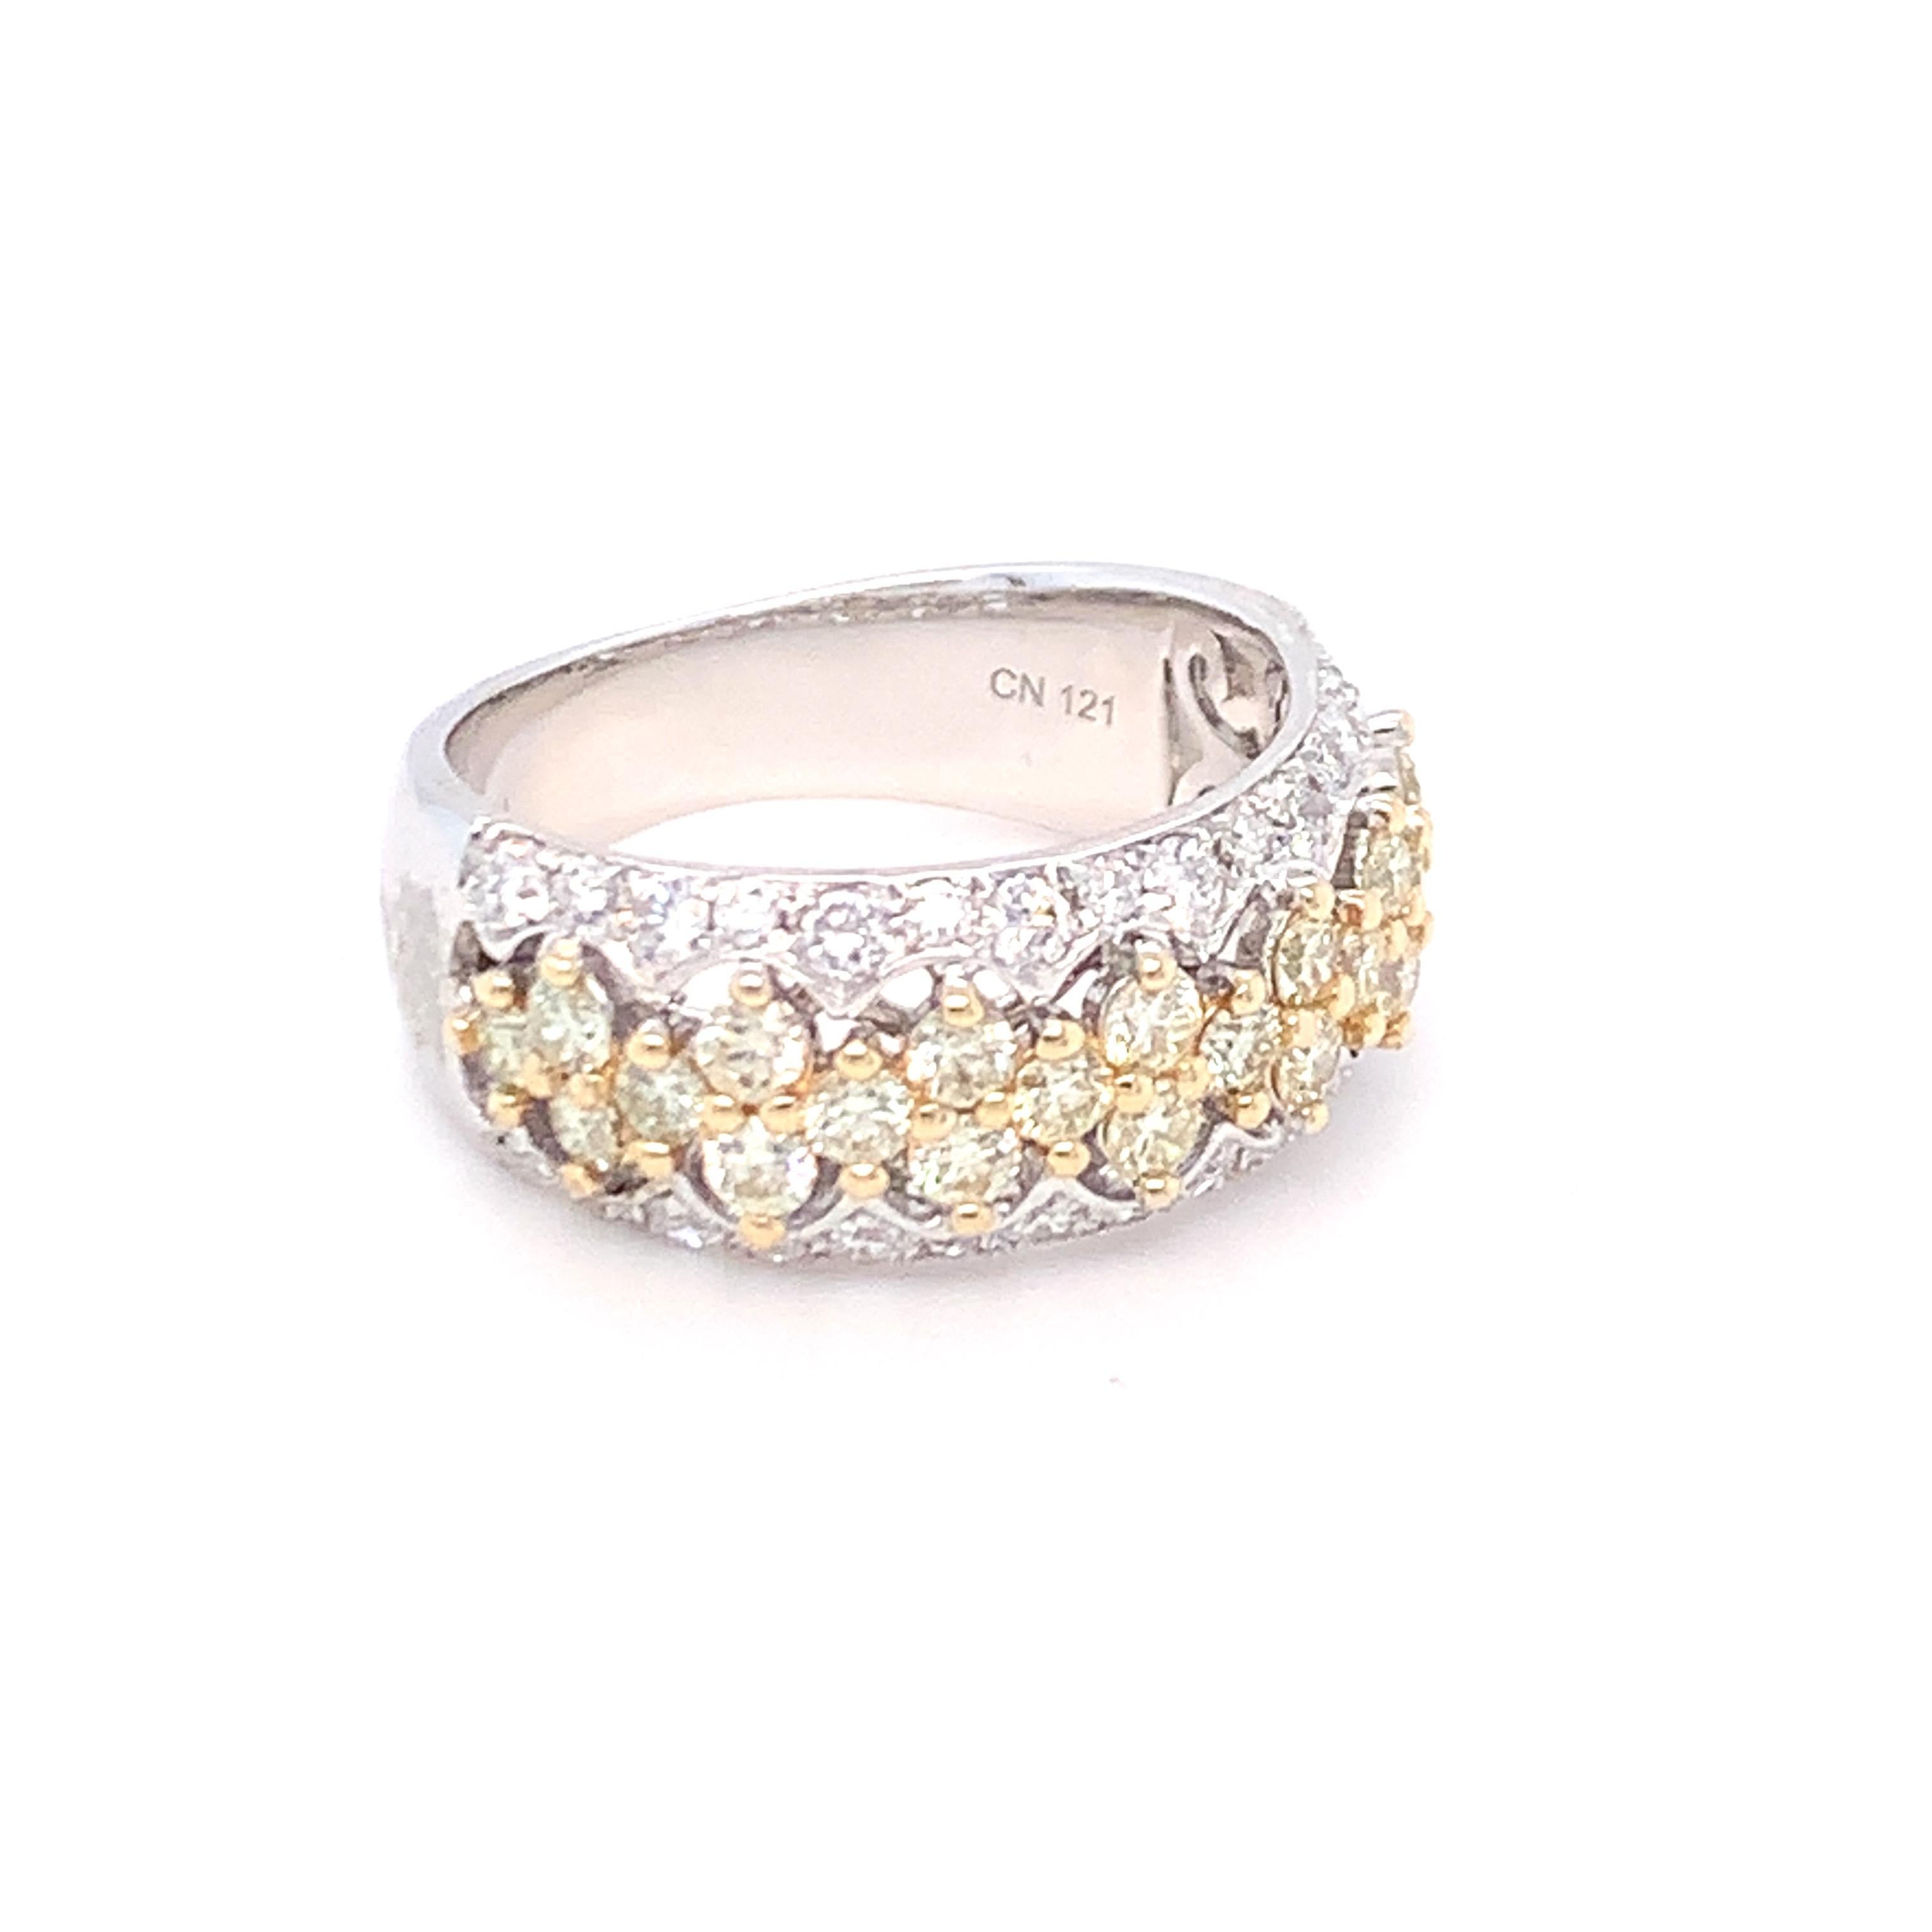 Women's 1.45 Carat Yellow & White Diamond Band Ring in 14K White Gold For Sale